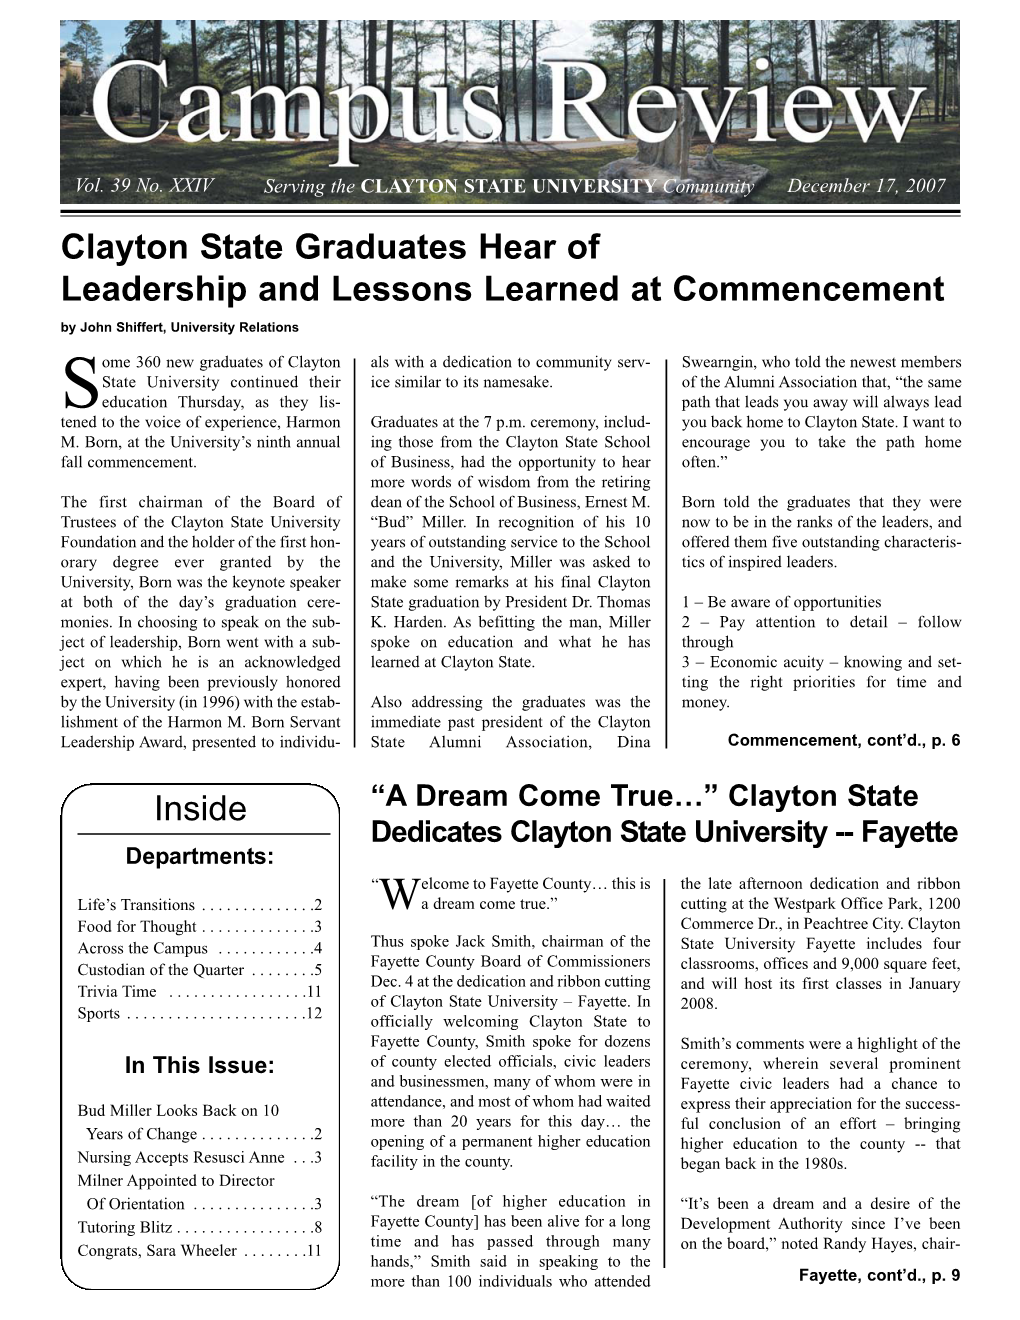 Inside Clayton State Graduates Hear of Leadership and Lessons Learned at Commencement